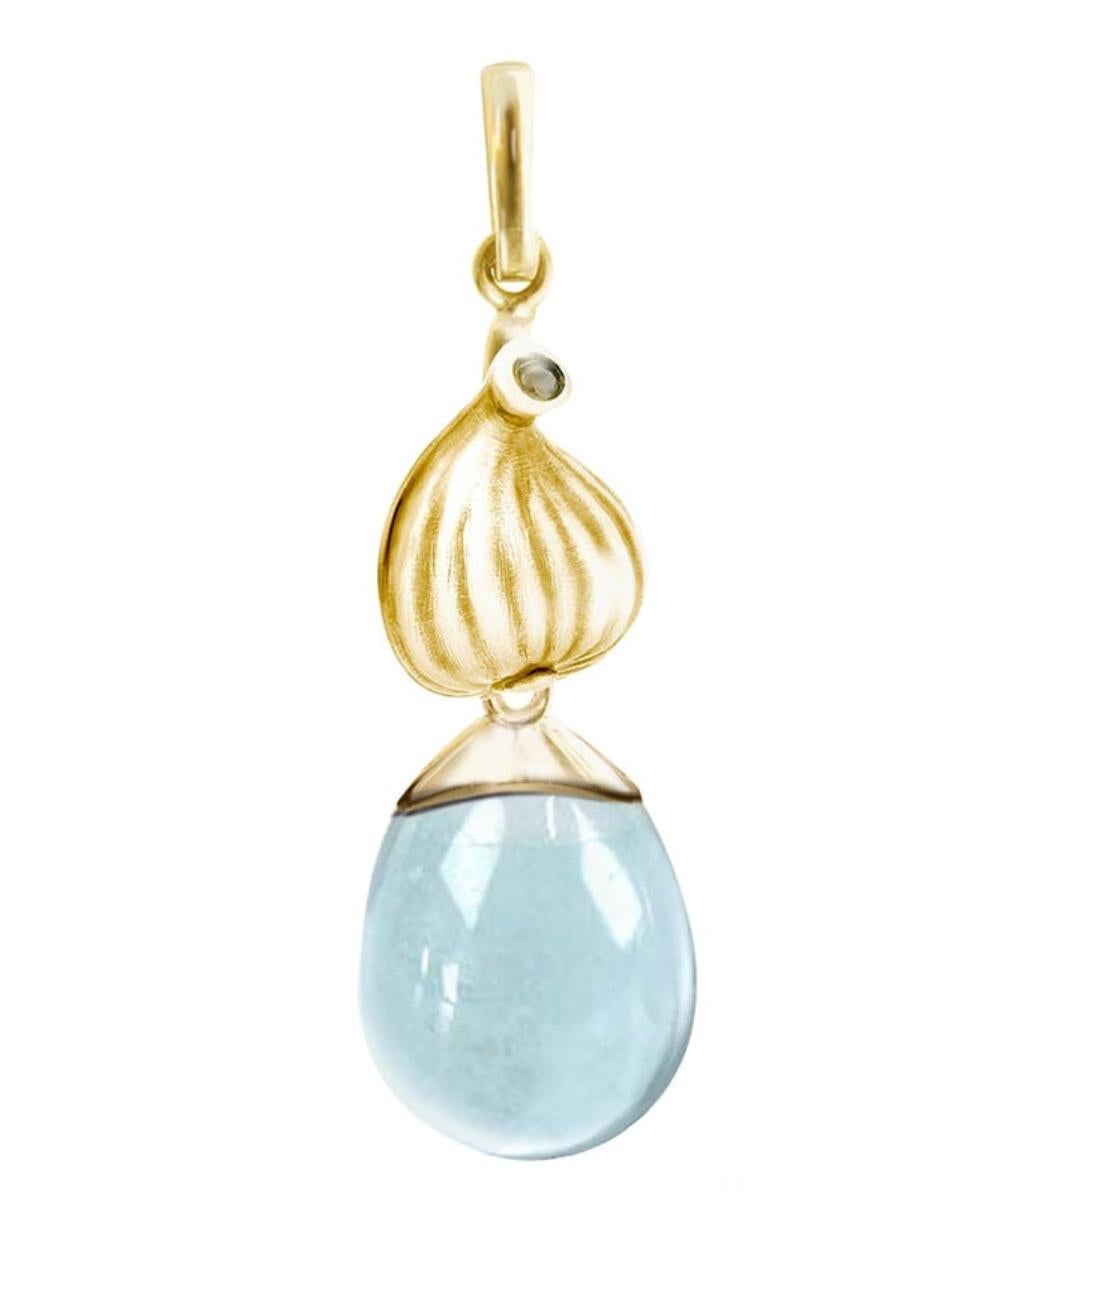 This Fig drop pendant necklace is a beautiful piece of jewellery made of 18 karat yellow gold, featuring a detachable cabochon blue quartz gem drop that is open to the light. This collection was featured in Vogue UA.

The artist behind this unique